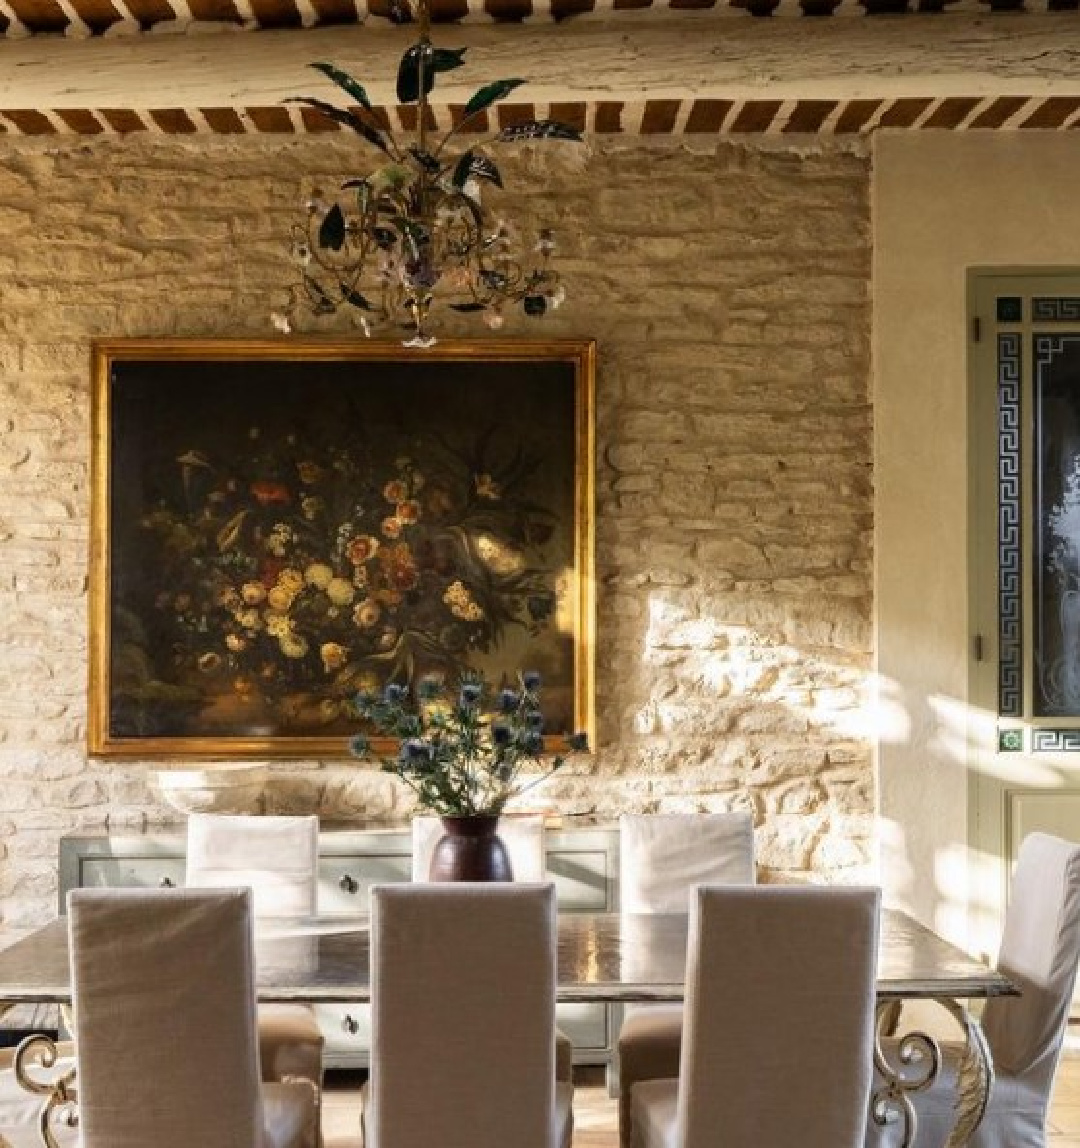 French country dining room. Warm European luxury and cozy opulence in a French vacation villa in Provence - La Bastide de Laurence. #frenchbastide #frenchvilla #luxuryvilla #provencevilla #warmeuropeanluxury #cozyopulence #provencehomes #frenchcountryinterior